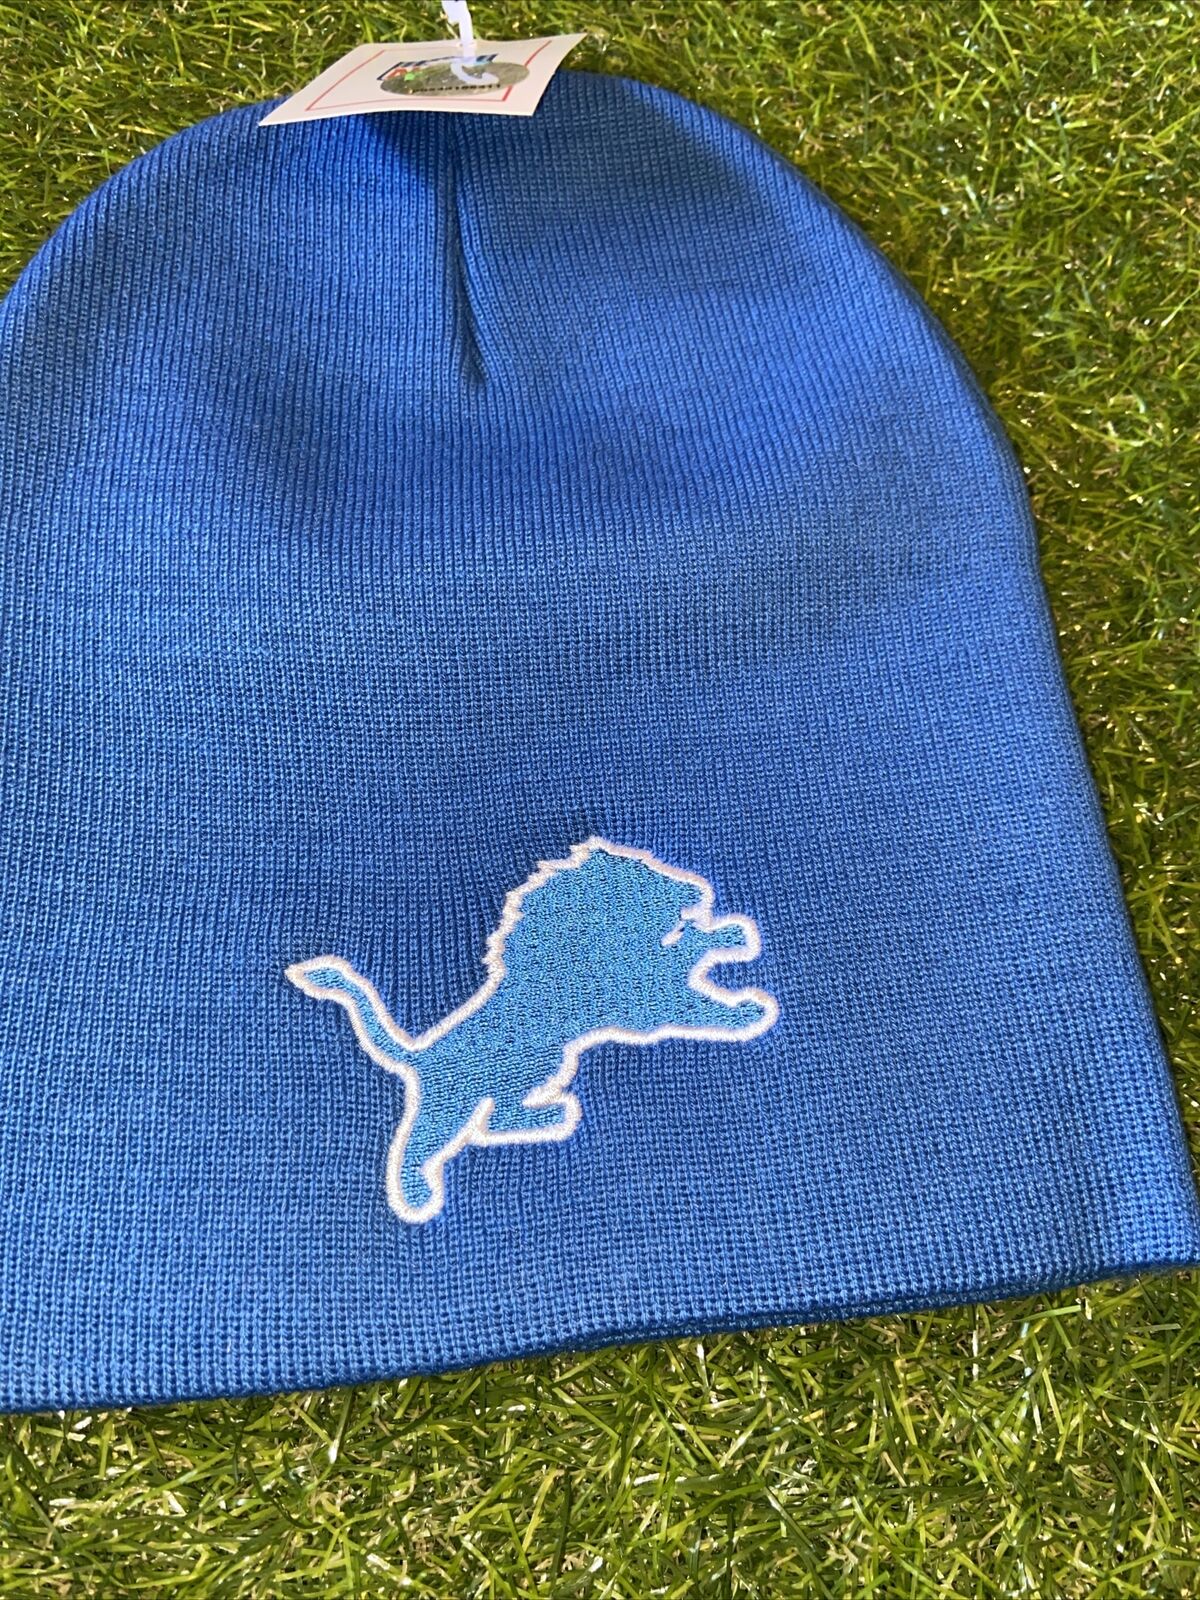 Detroit Lions Blue Vintage Team NFL Embroidered Cuffless Knit Beanie/Skull Cap